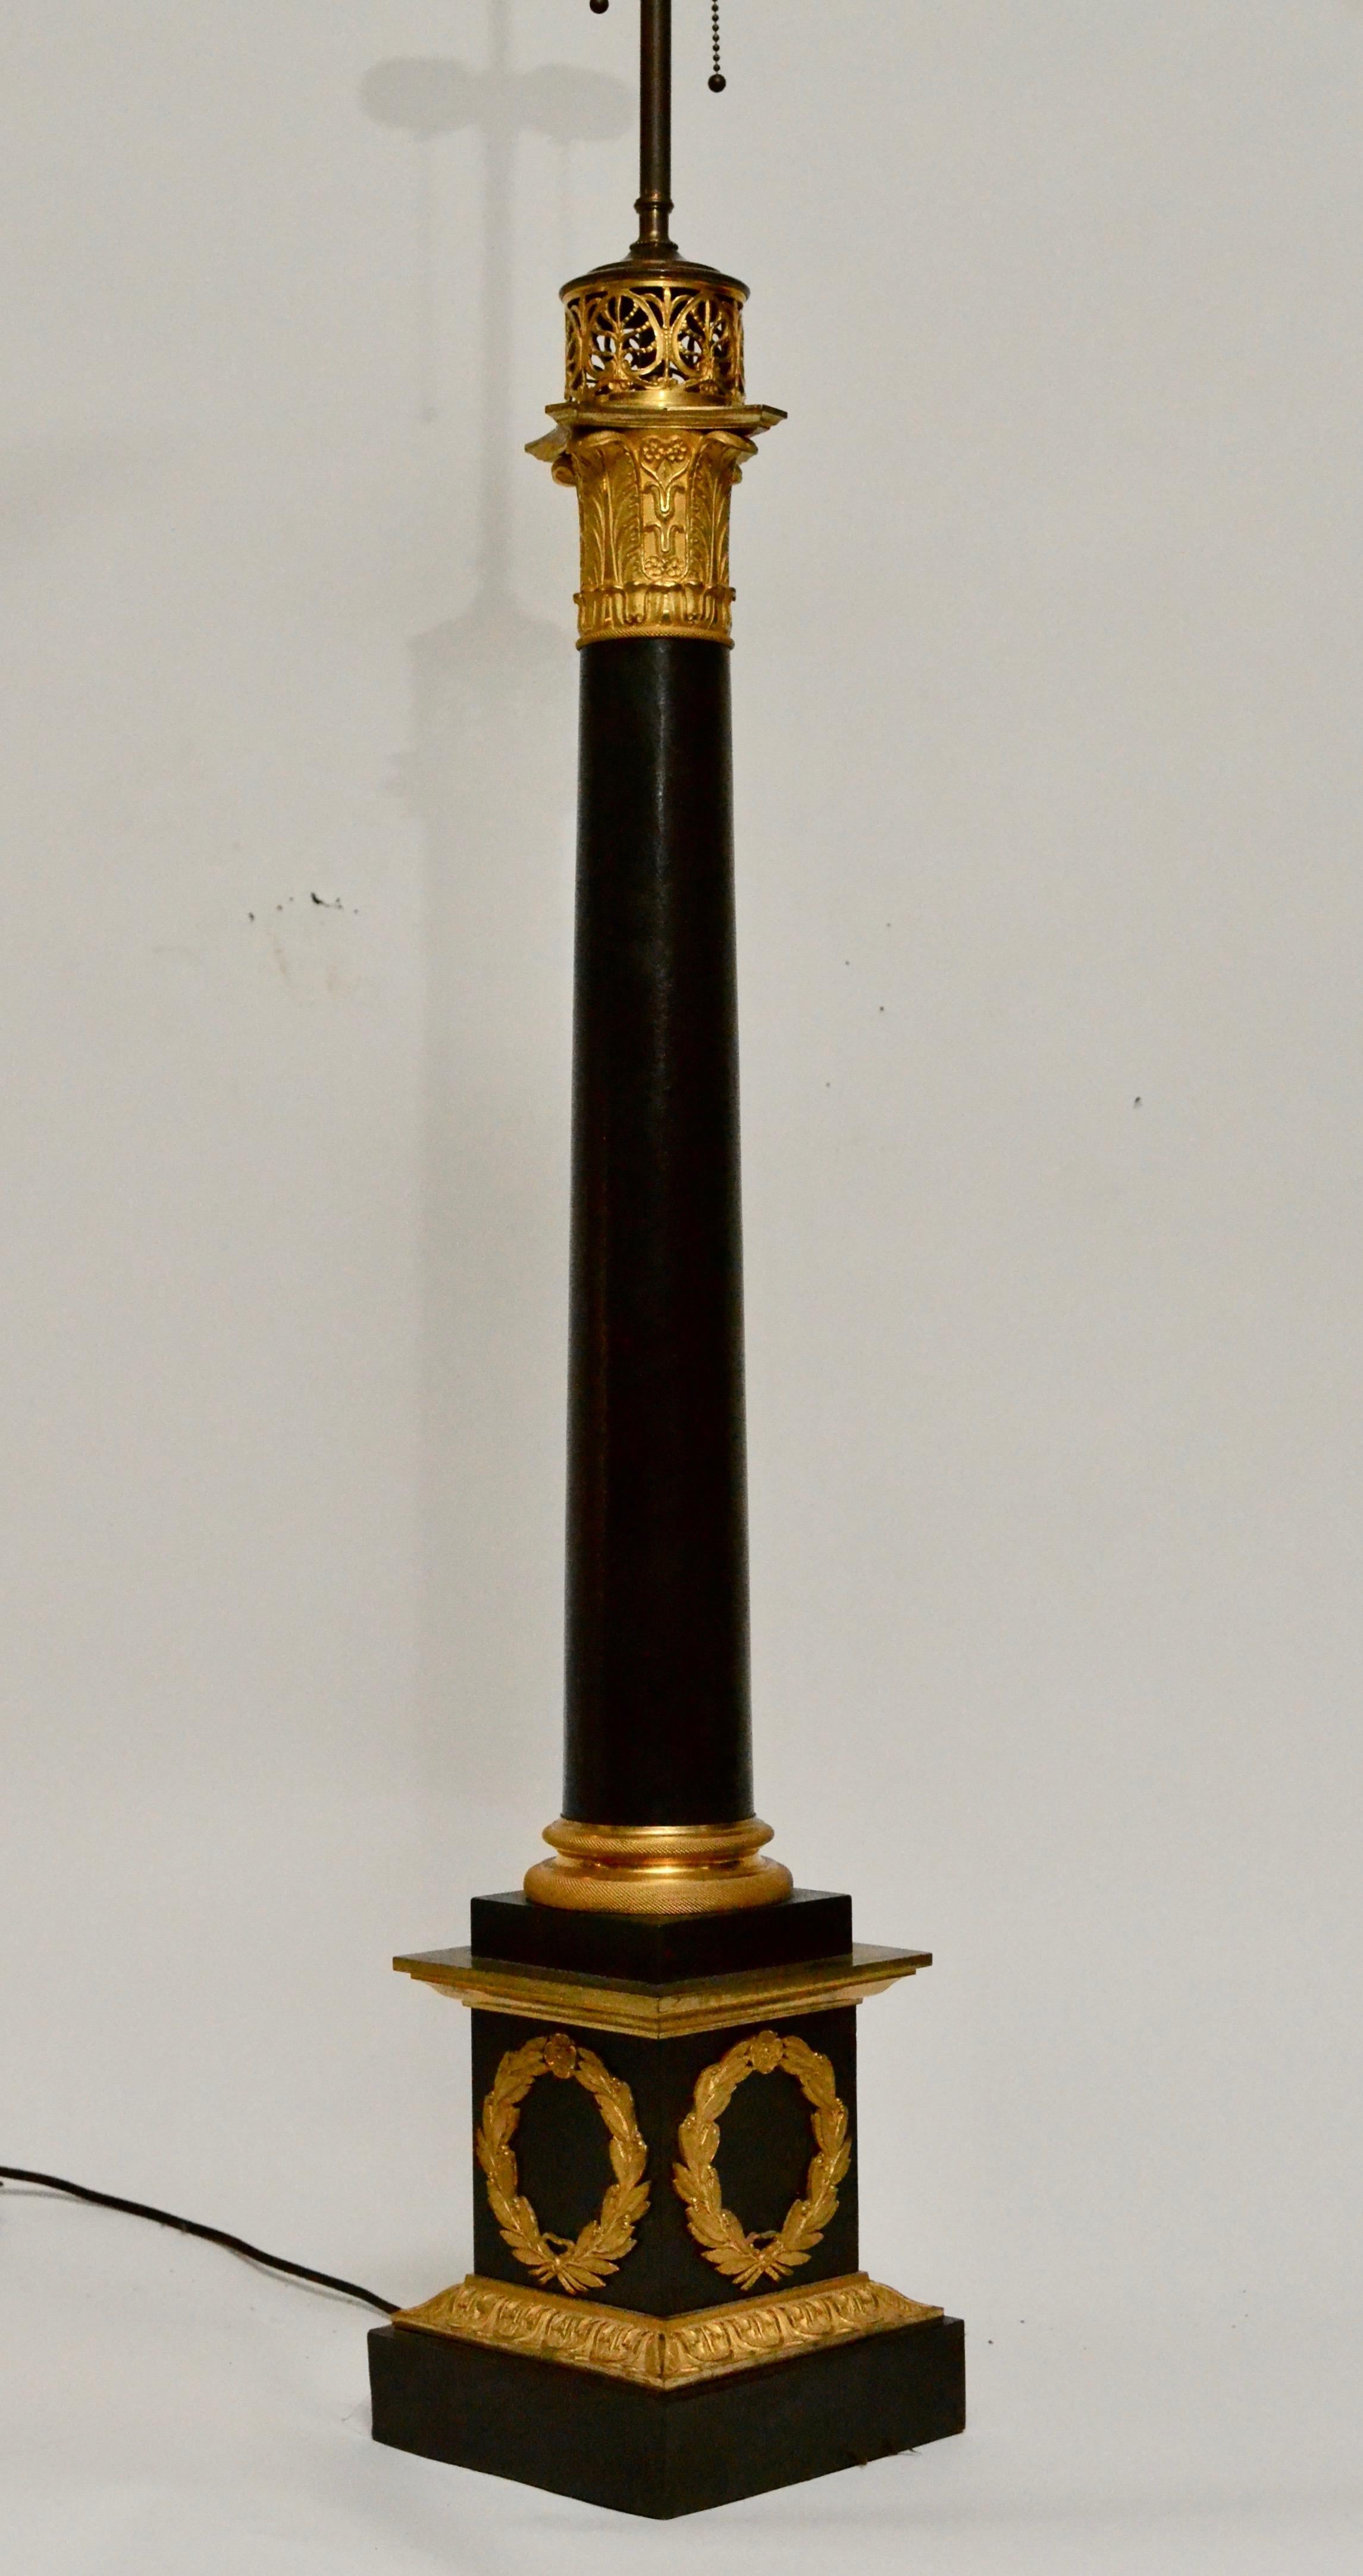 Large gilt and patinated Empire bronze table lamp from the first half of the 19th century. Now fitted with electricity.  Height with fitting 123cm (48.5inches),87cm (34.25 inches) without.